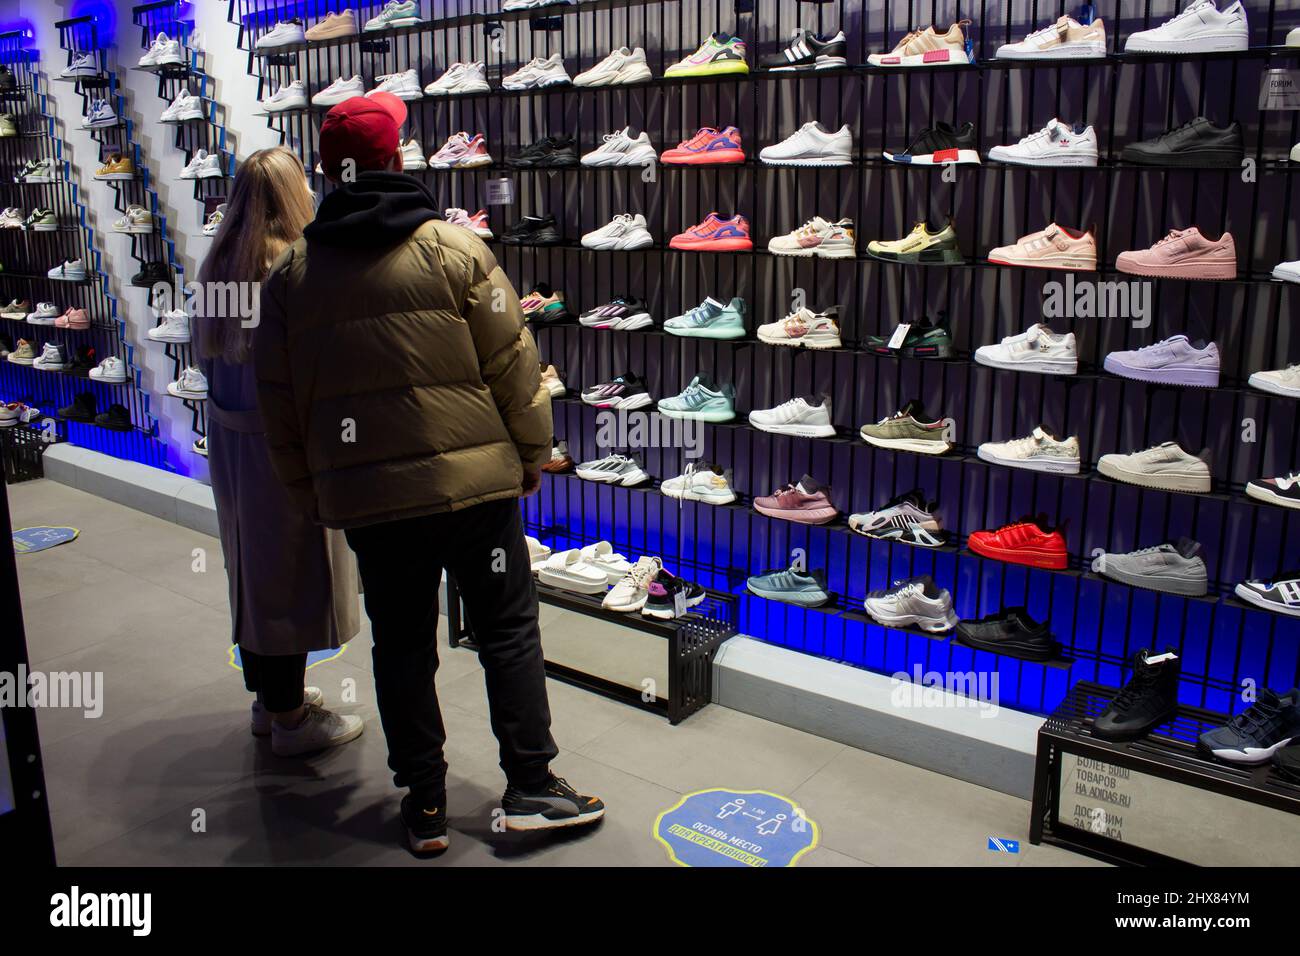 Shoppers select sneakers in an Adidas boutique in Moscow. Adidas is  expected to cease all online and offline sales in Russia by March 13, 2022,  in light of Russia's ongoing military campaign